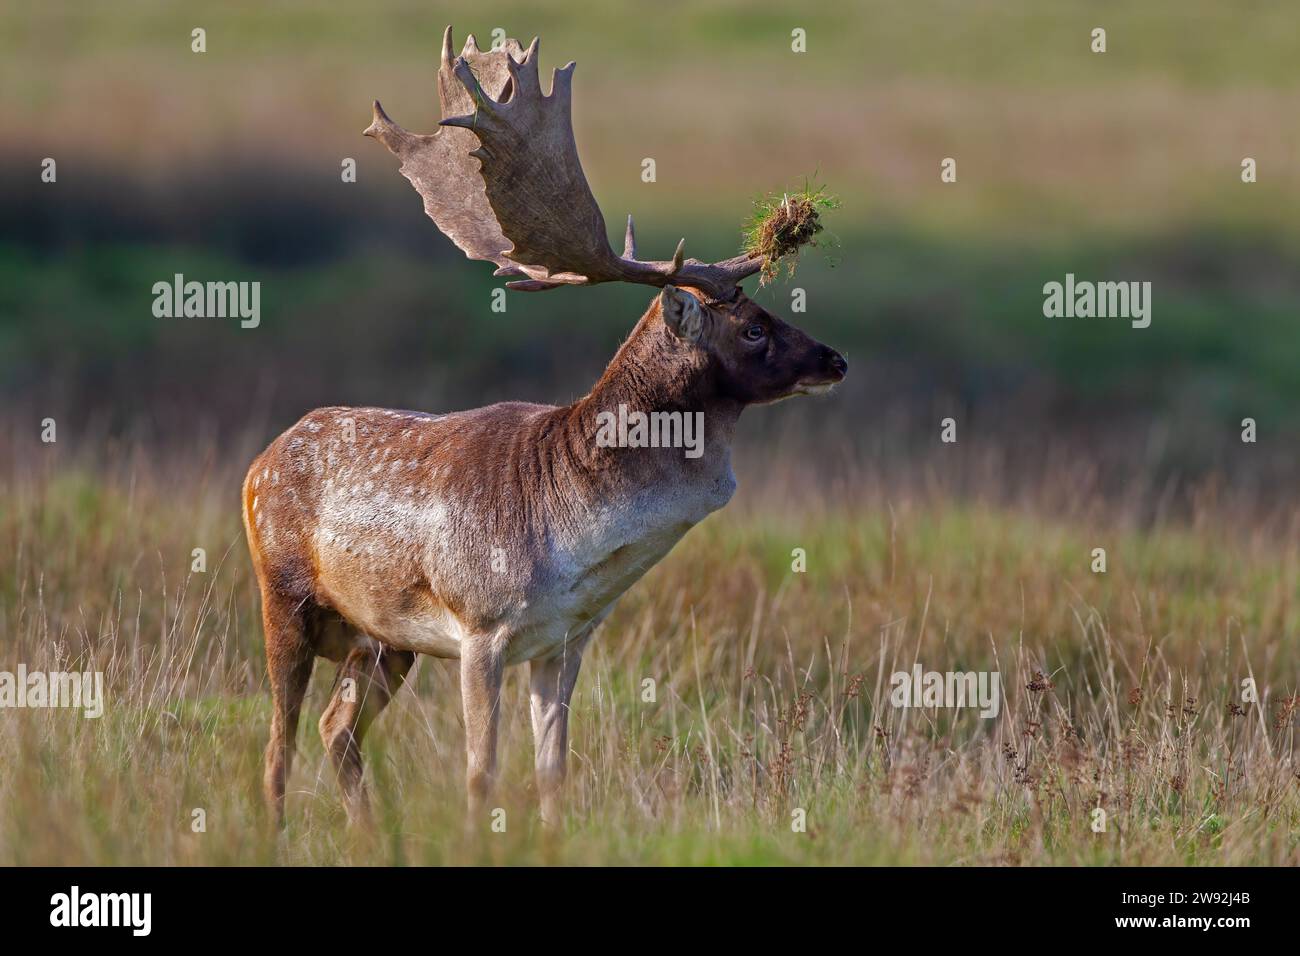 Majestic Fallow Deer Stag with large Antlers Stock Photo